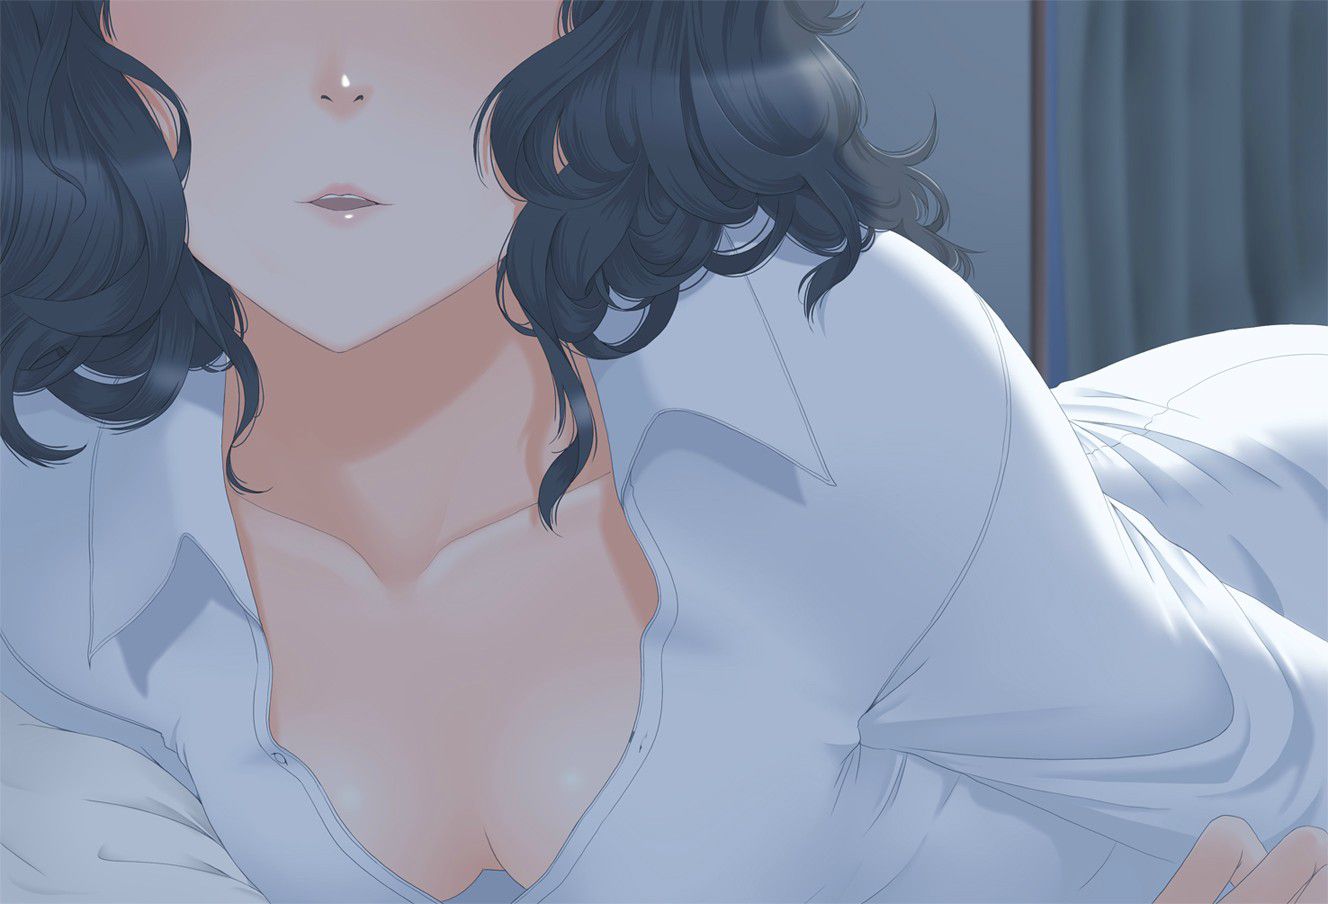 Cute characters "amagami" transcendence erotic illustrations images of the wwwwwww 26